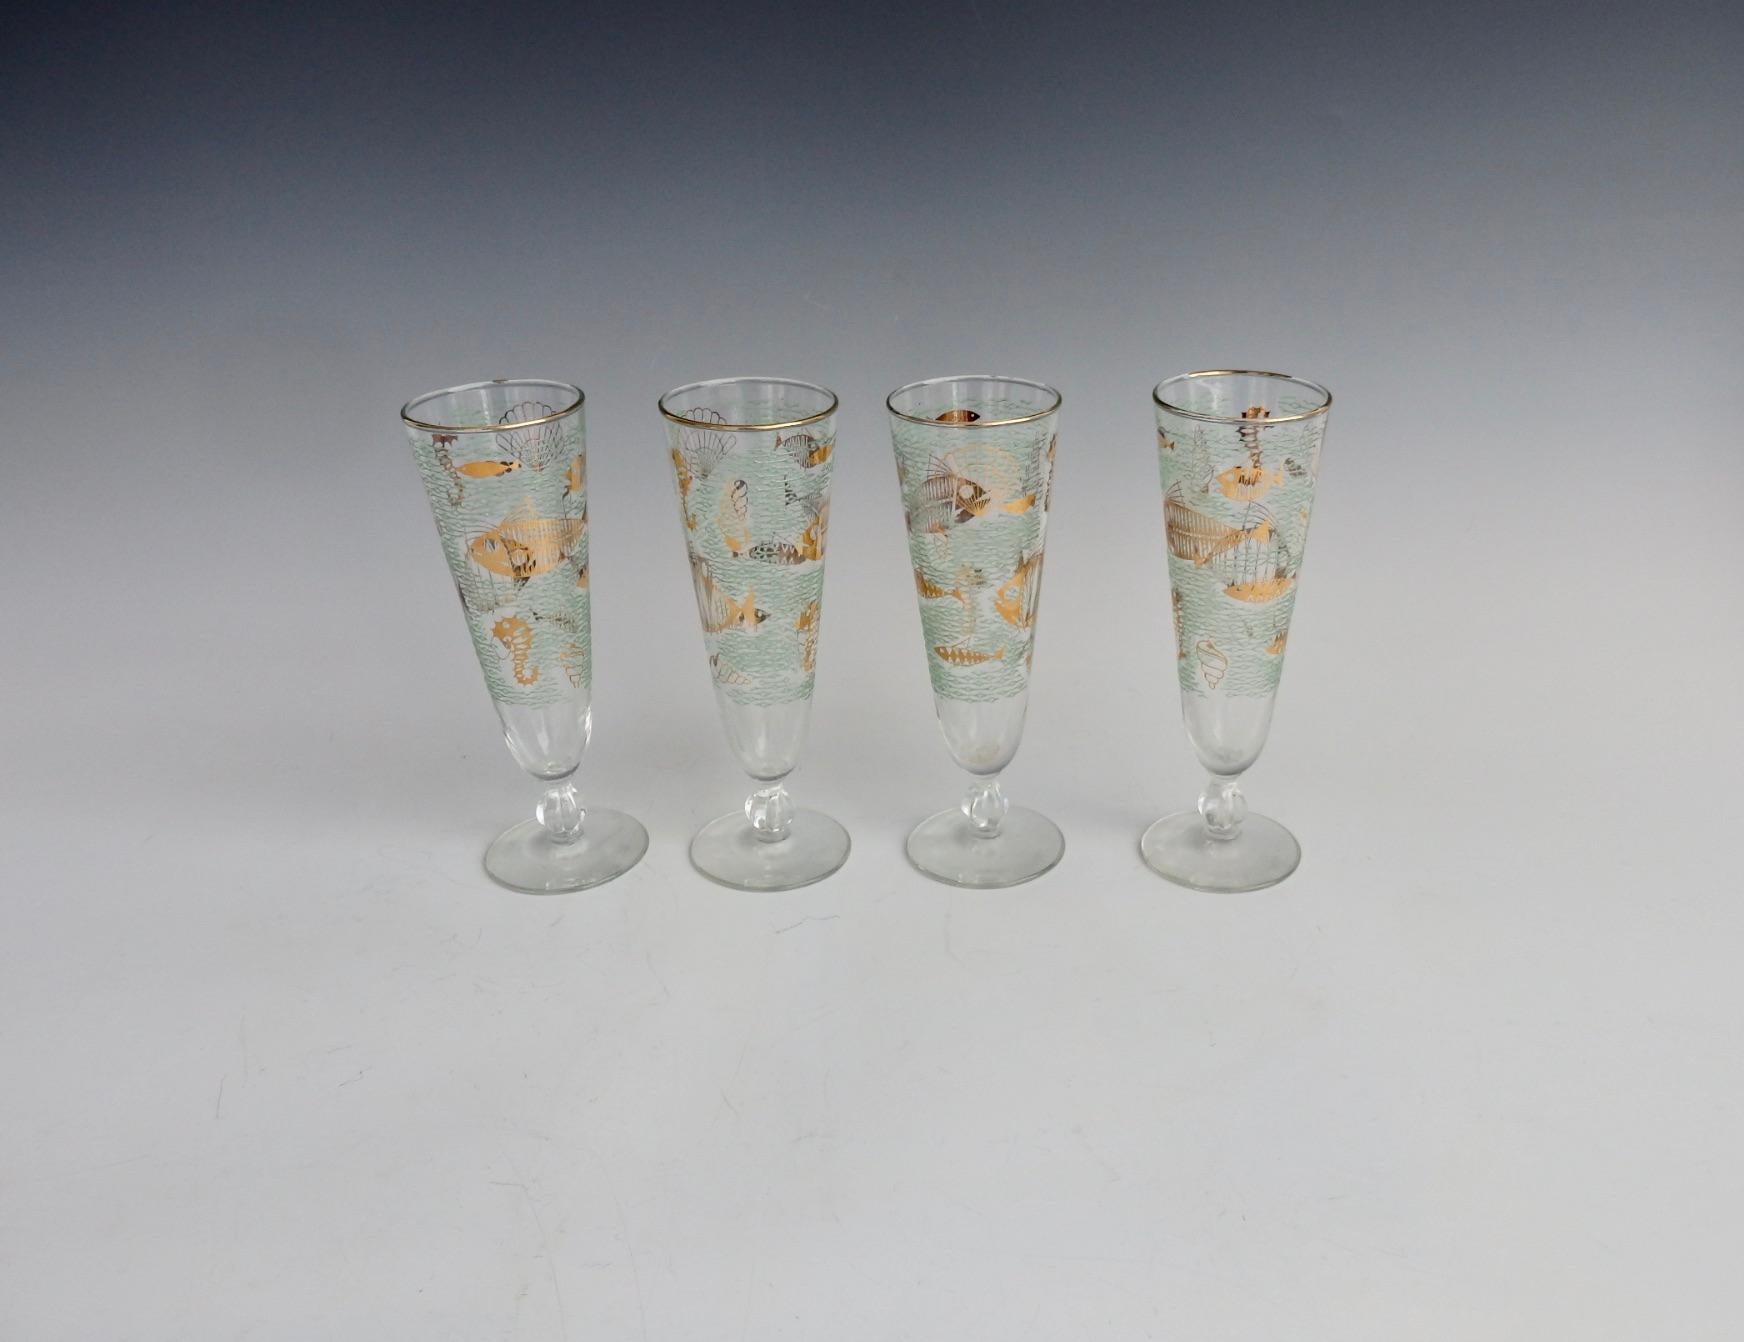 Four pilsner glasses. Nicely decorated with ocean like rippled aqua lines in textured finish accenting and stylized sea life.